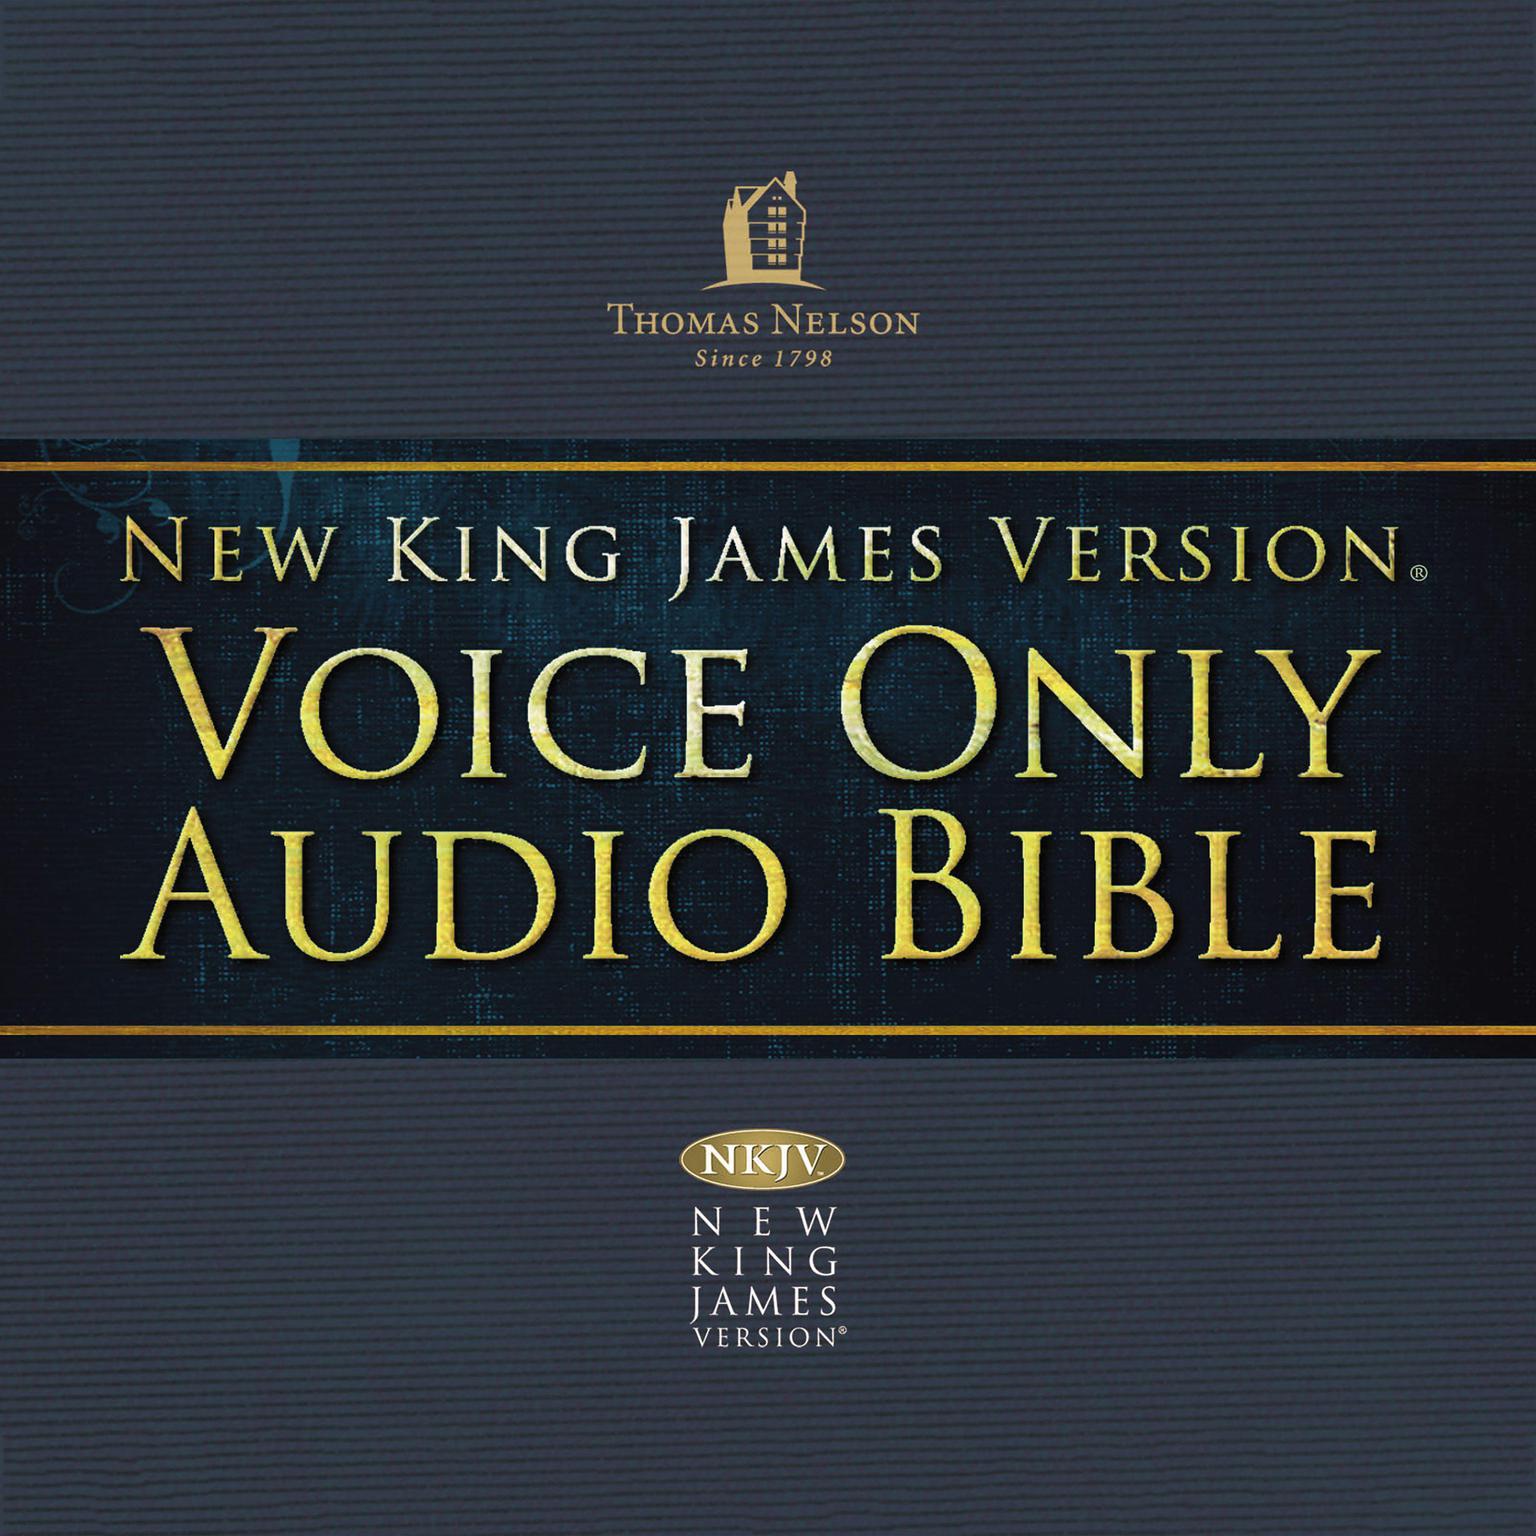 Voice Only Audio Bible - New King James Version, NKJV (Narrated by Bob Souer): (01) Genesis: Holy Bible, New King James Version Audiobook, by Thomas Nelson